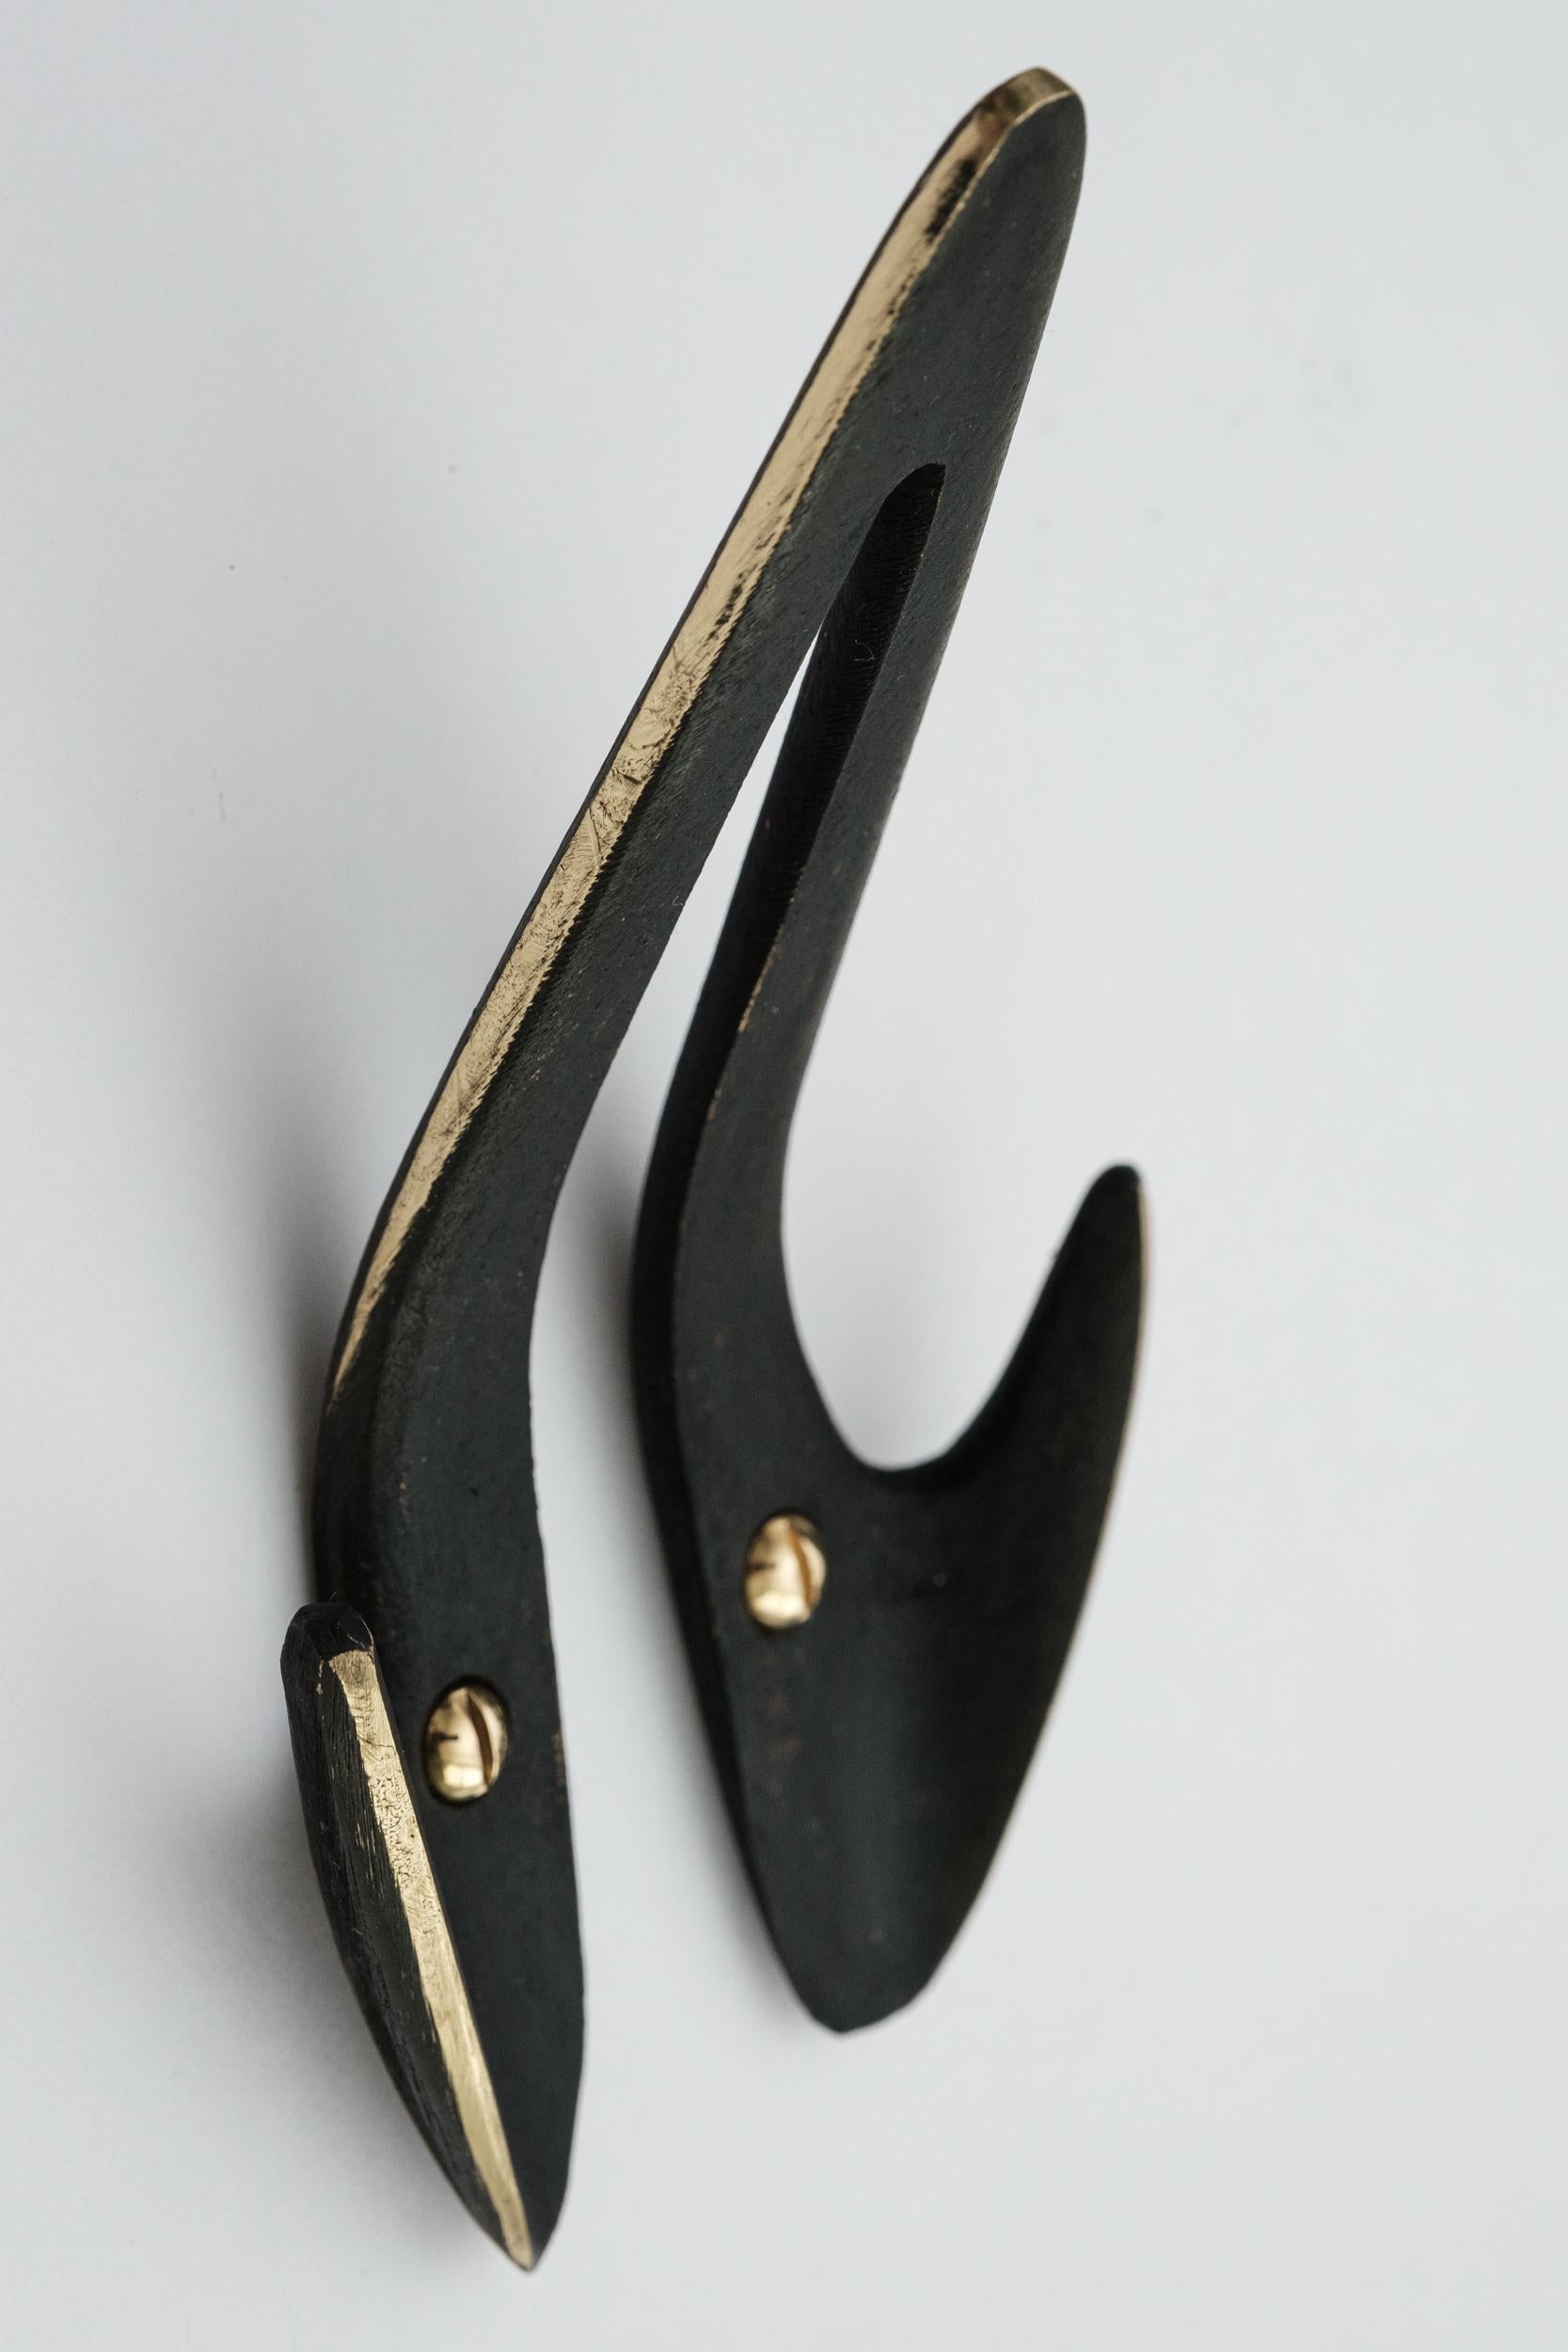 Carl Auböck Model #4994 patinated brass hook. Designed in the 1950s, this versatile and Minimalist Viennese hook is executed in patinated brass by Werkstätte Carl Auböck, Austria. 

Produced by Carl Auböck IV in the original Auböck workshop in the